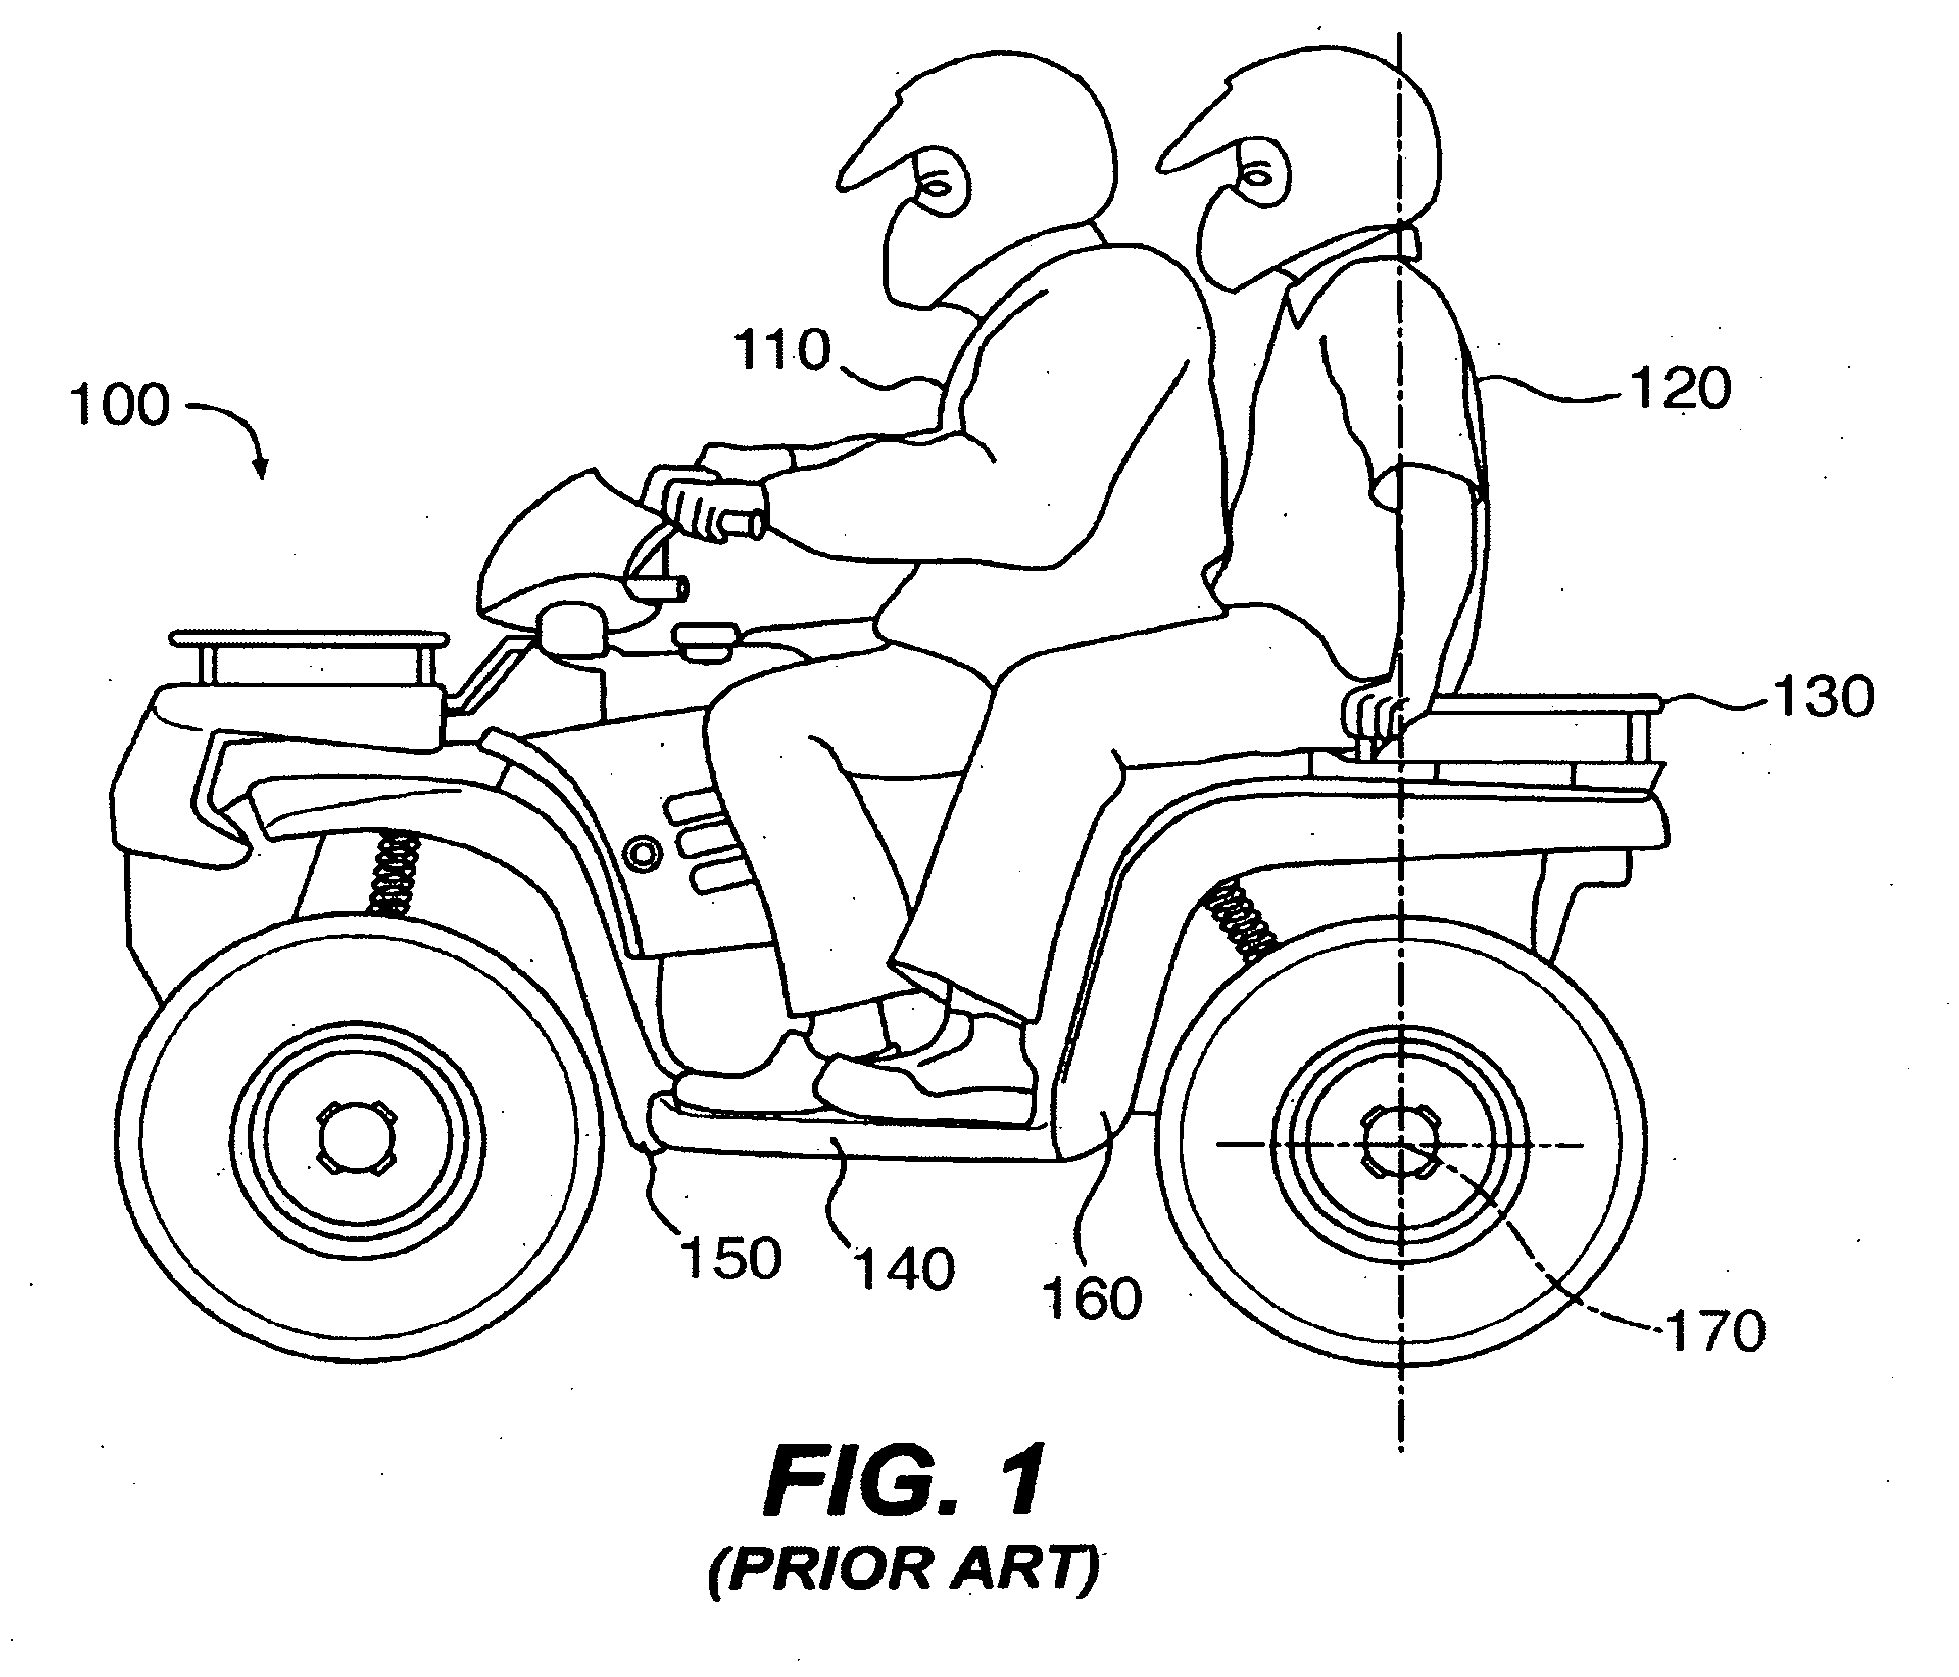 Flip-down footrest for an all-terrain vehicle